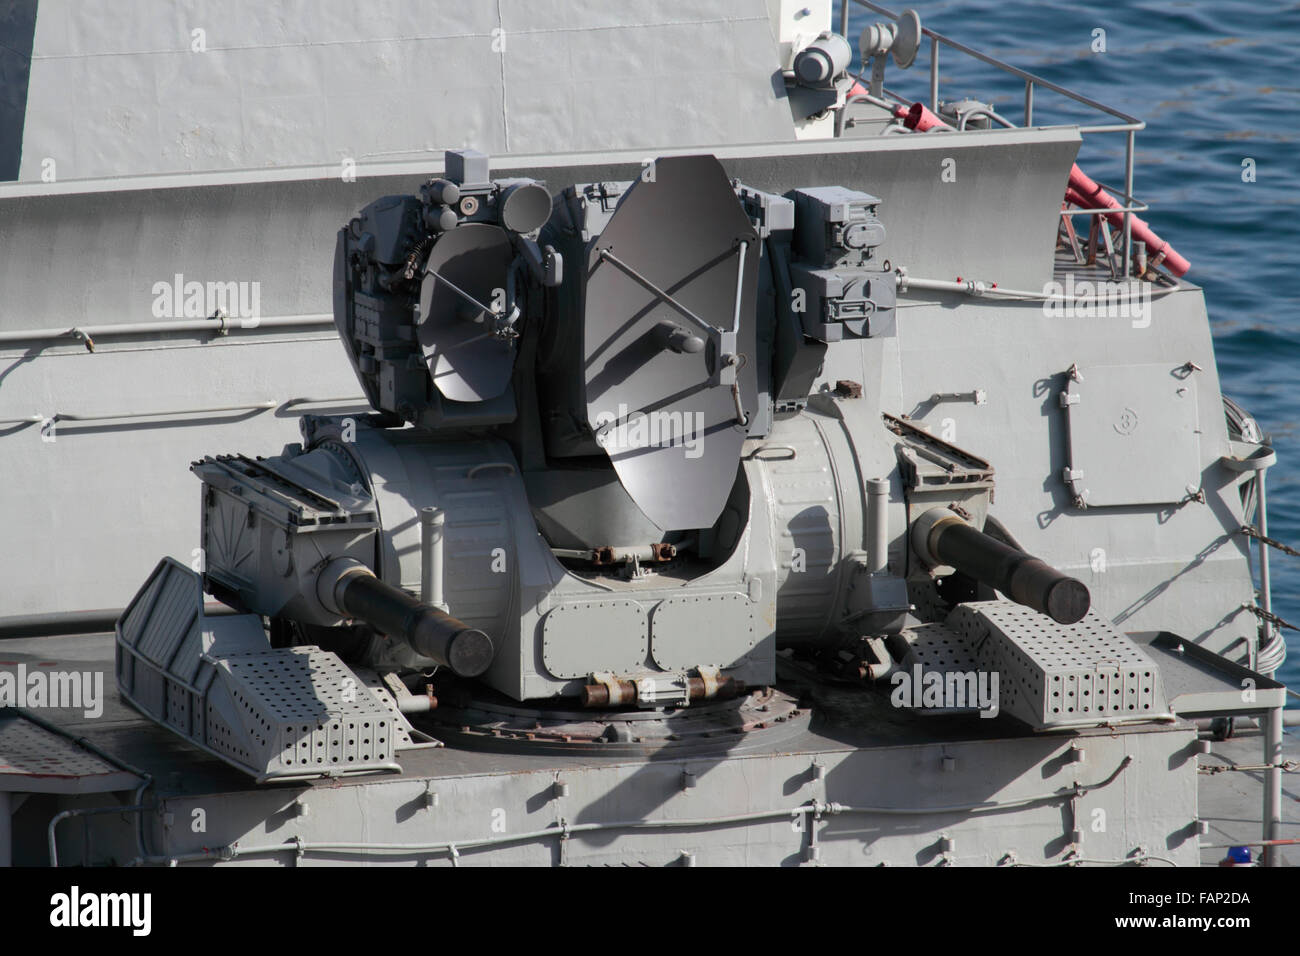 Advanced military technology. The Kashtan automated naval weapons system, with radar and 30mm cannon, on board the Russian Navy ship Yaroslav Mudry. Stock Photo